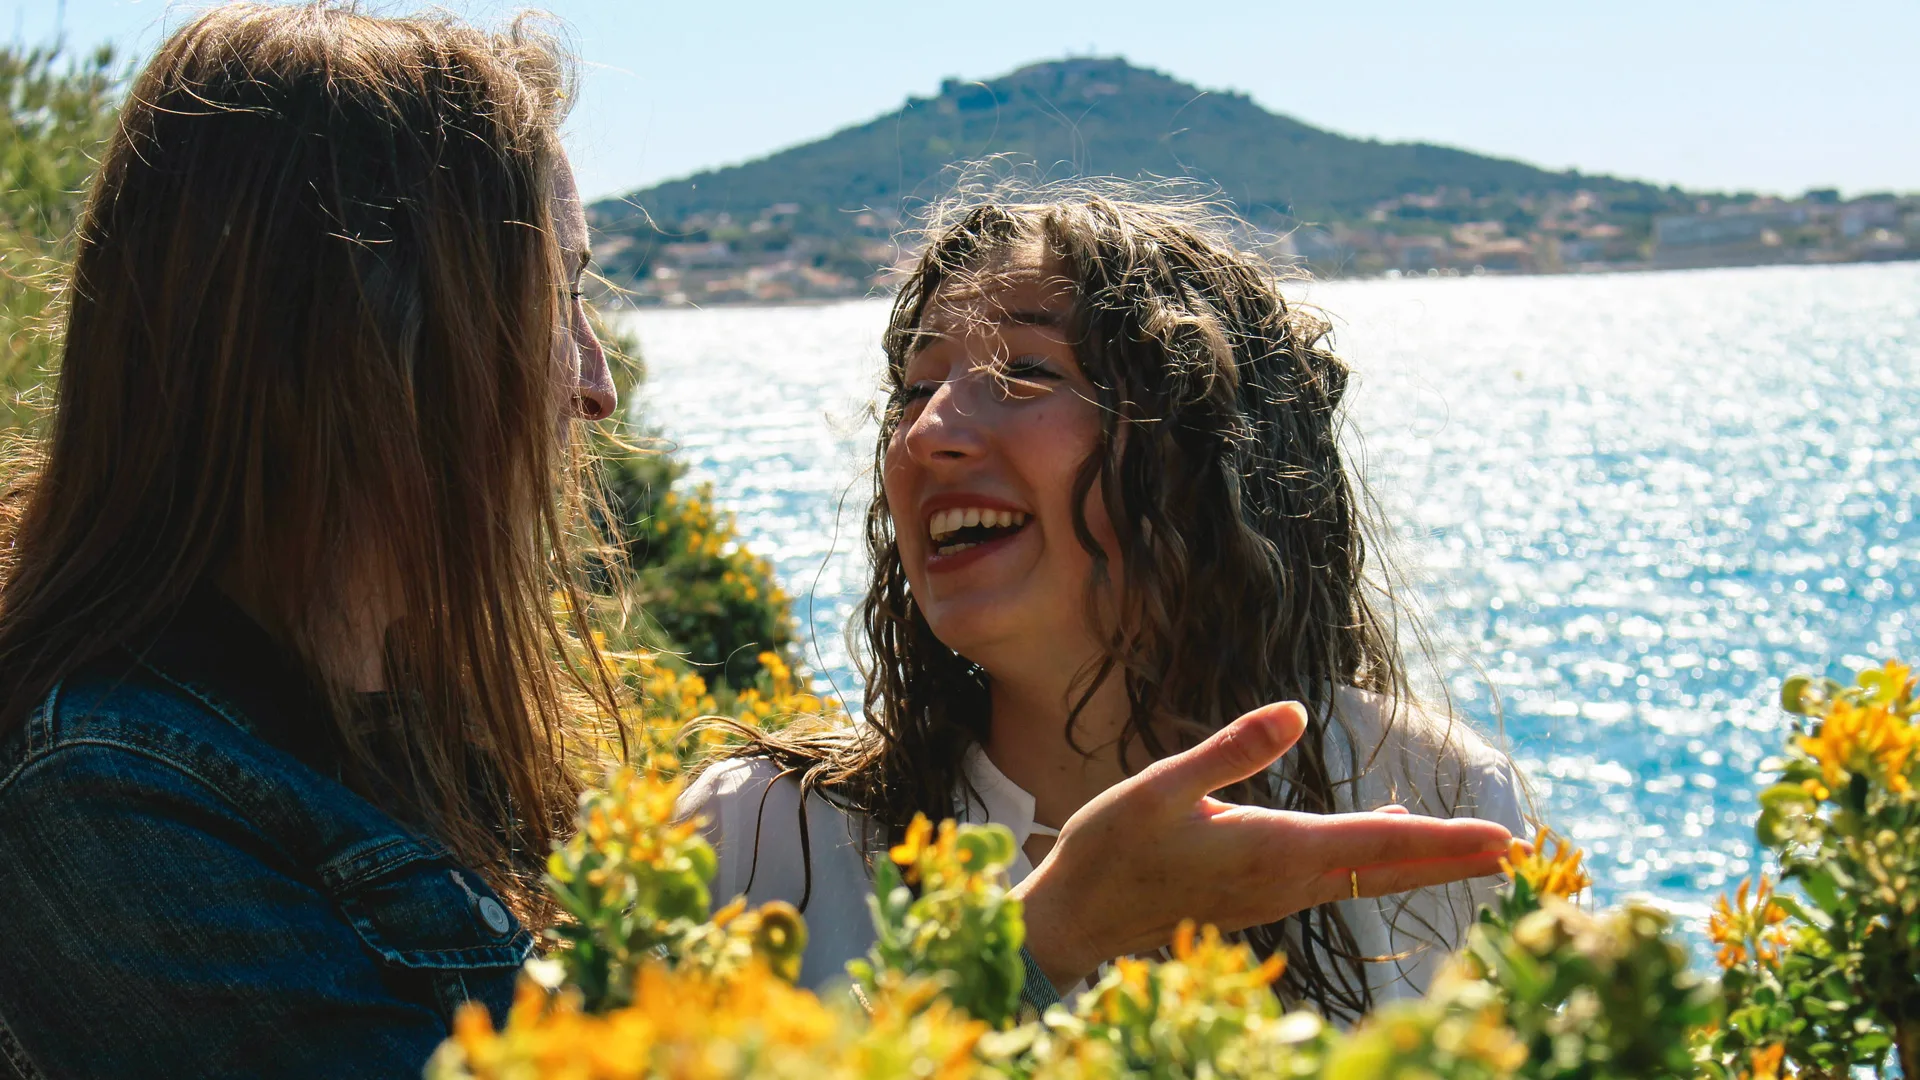 A photograph of two women laughing in conversation in front of yellow flowers against a lake and mountain background